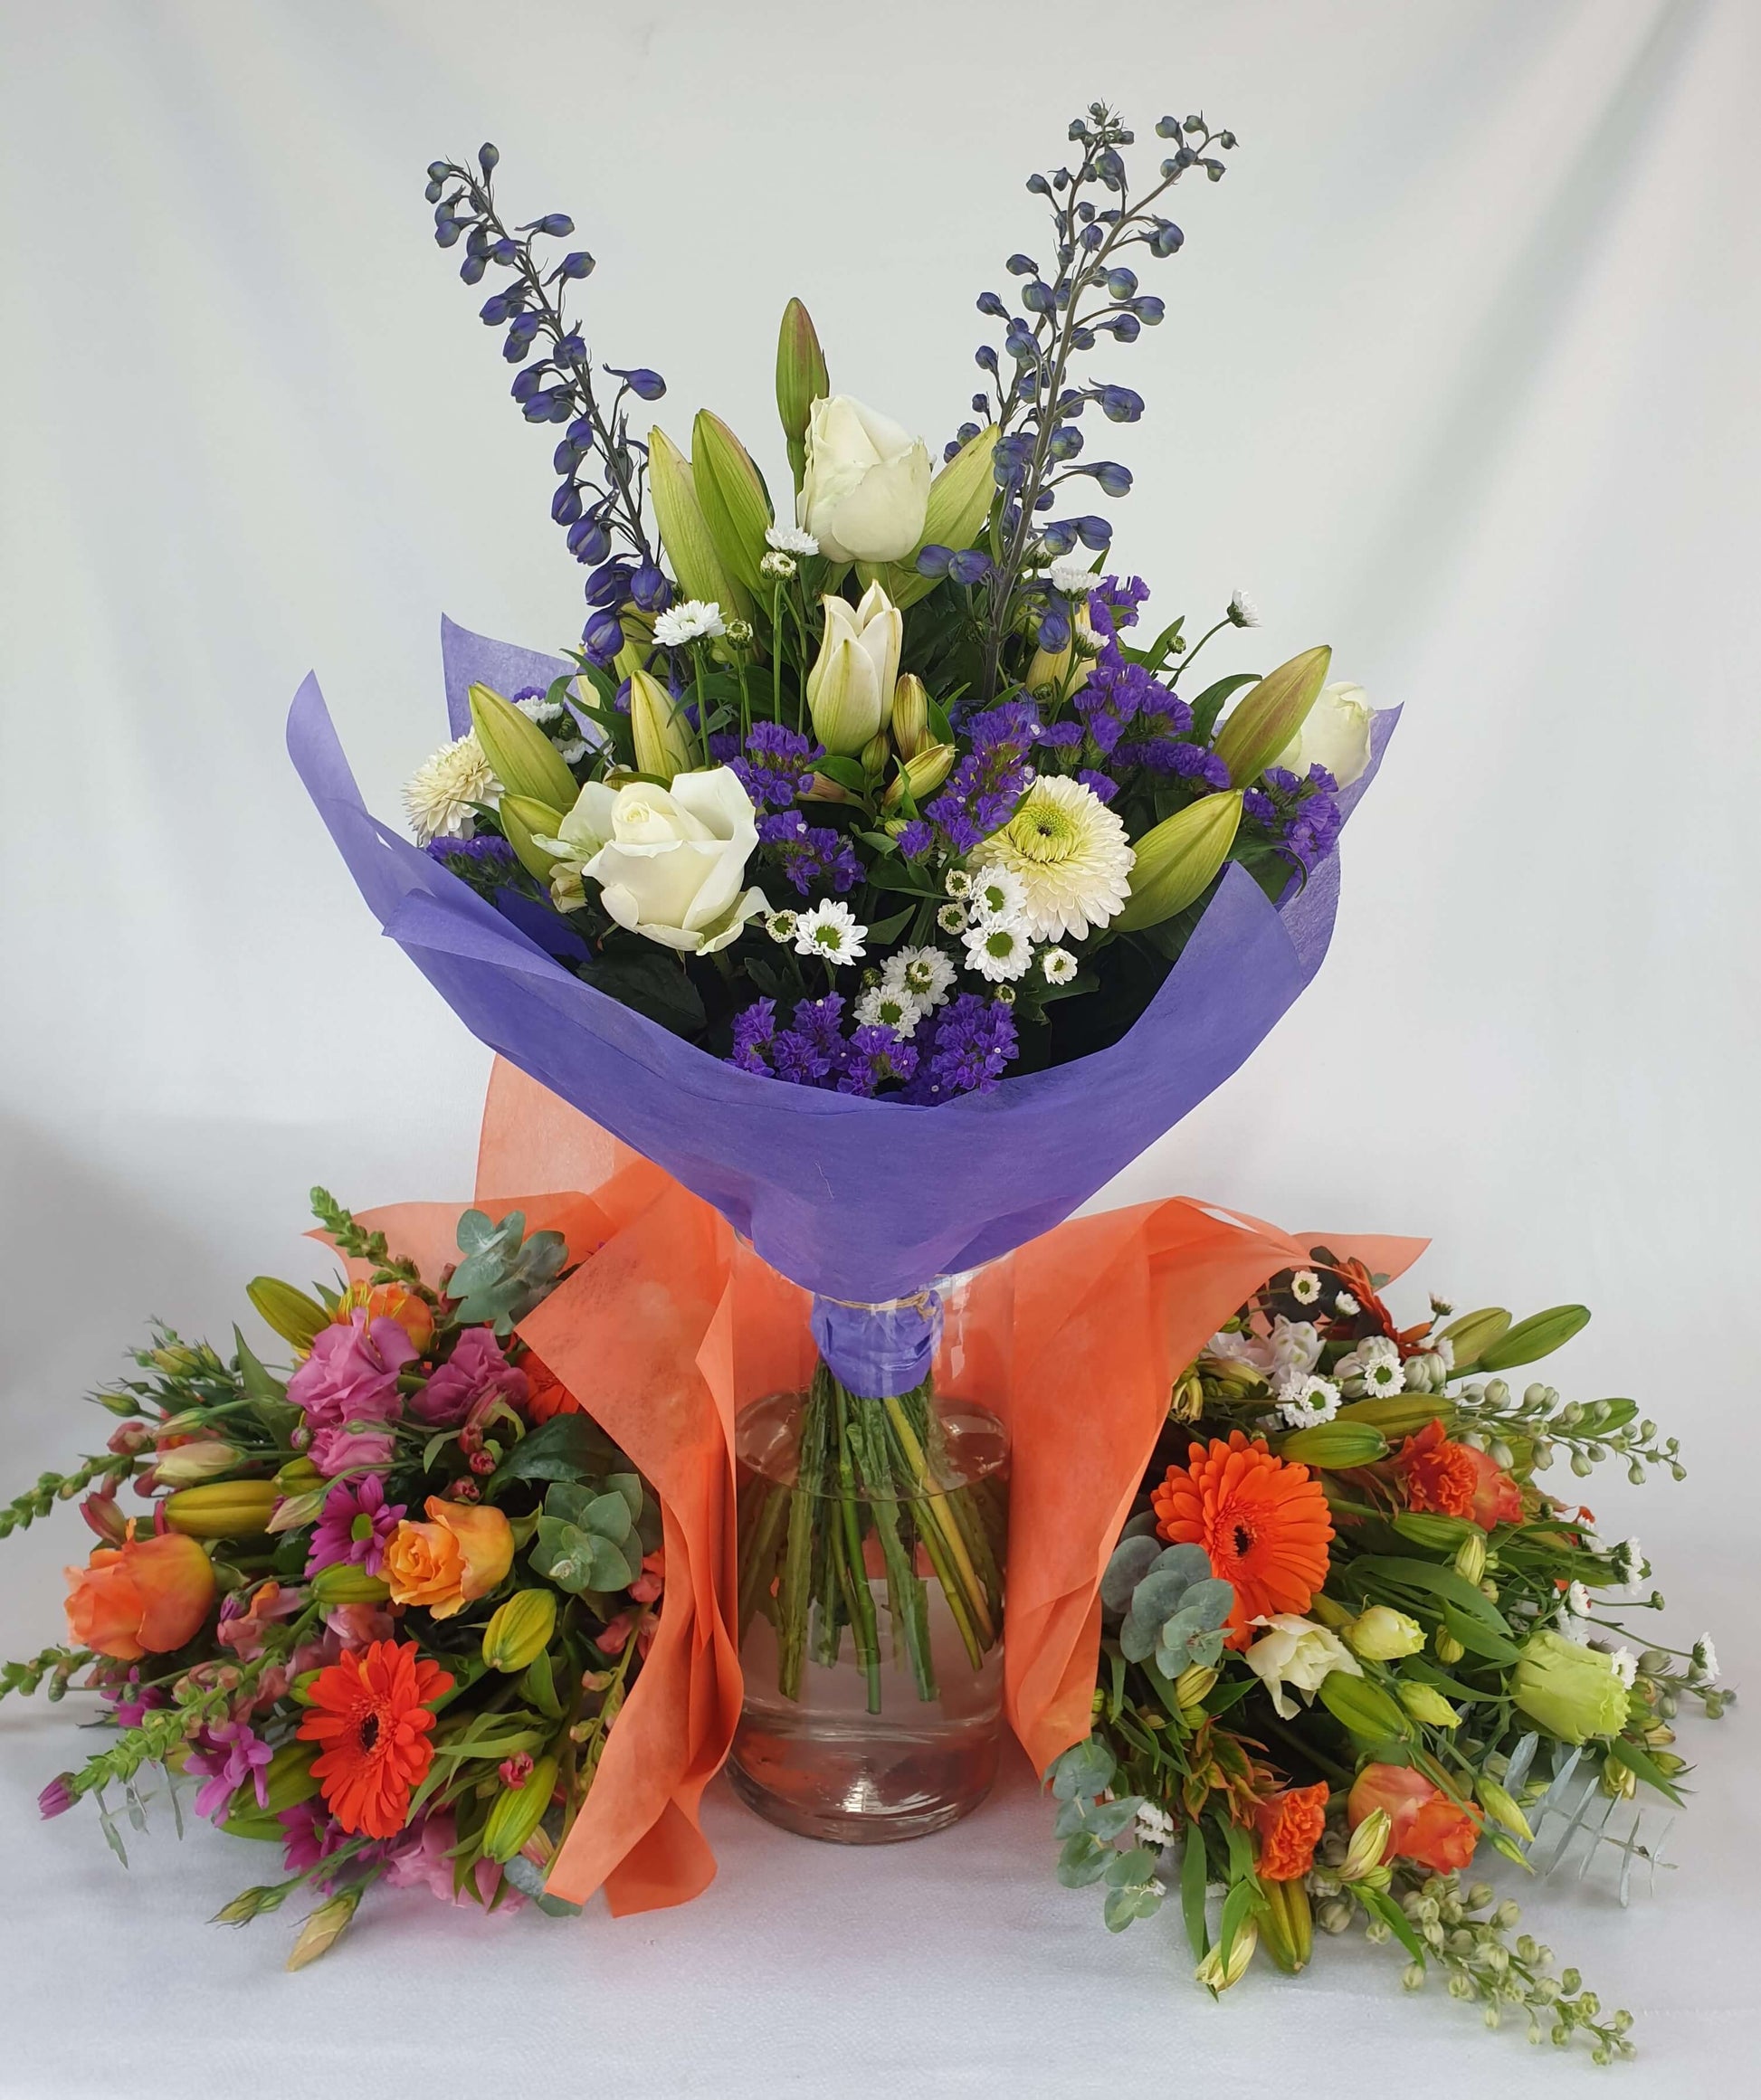 Three bouquets showing what you can receive in our subscription offer.